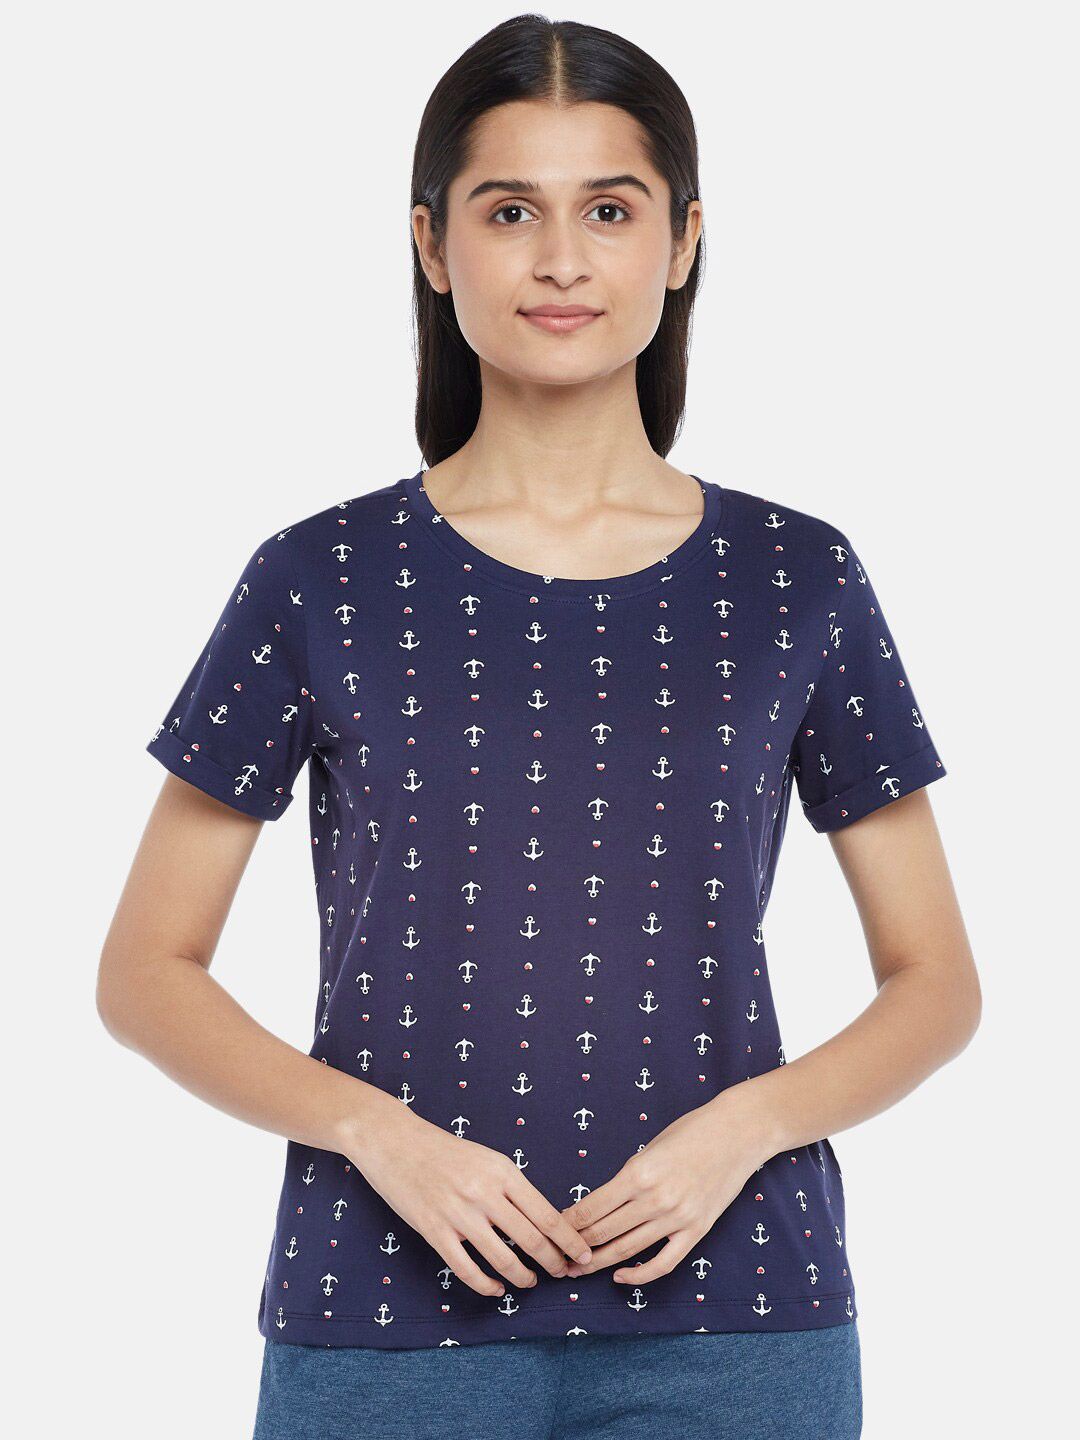 Dreamz by Pantaloons Navy Blue Geometric Print Lounge tshirt Price in India